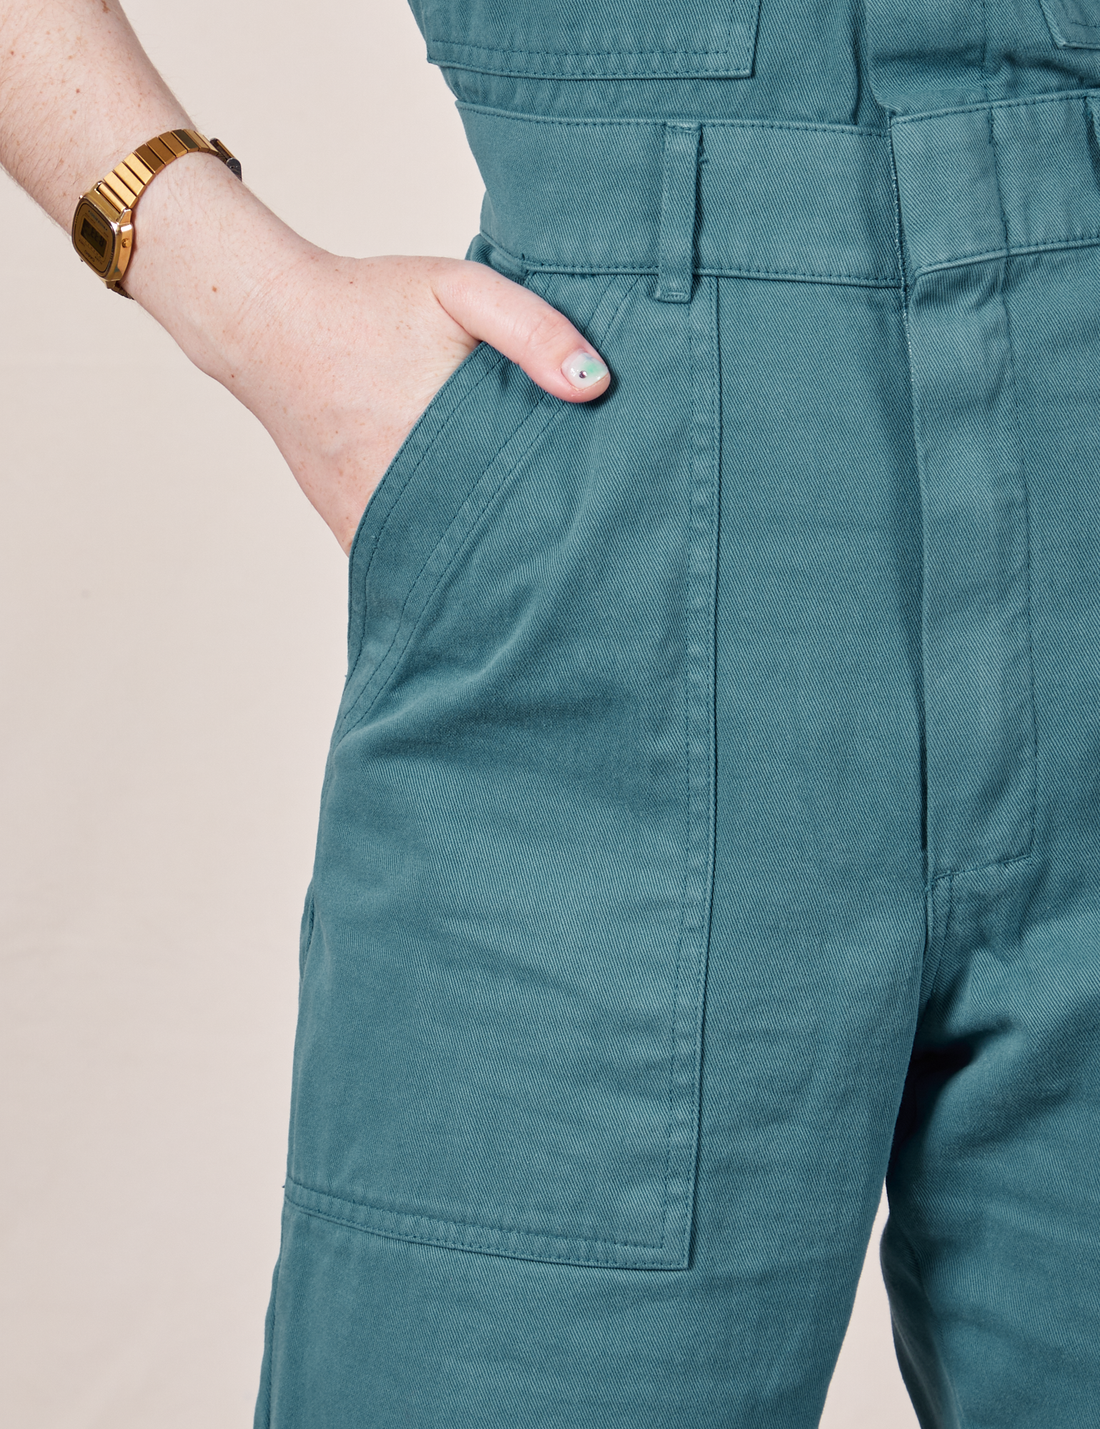 Front pocket close up of Petite Short Sleeve Jumpsuit in Marine Blue. Hana has her hand in the pocket.